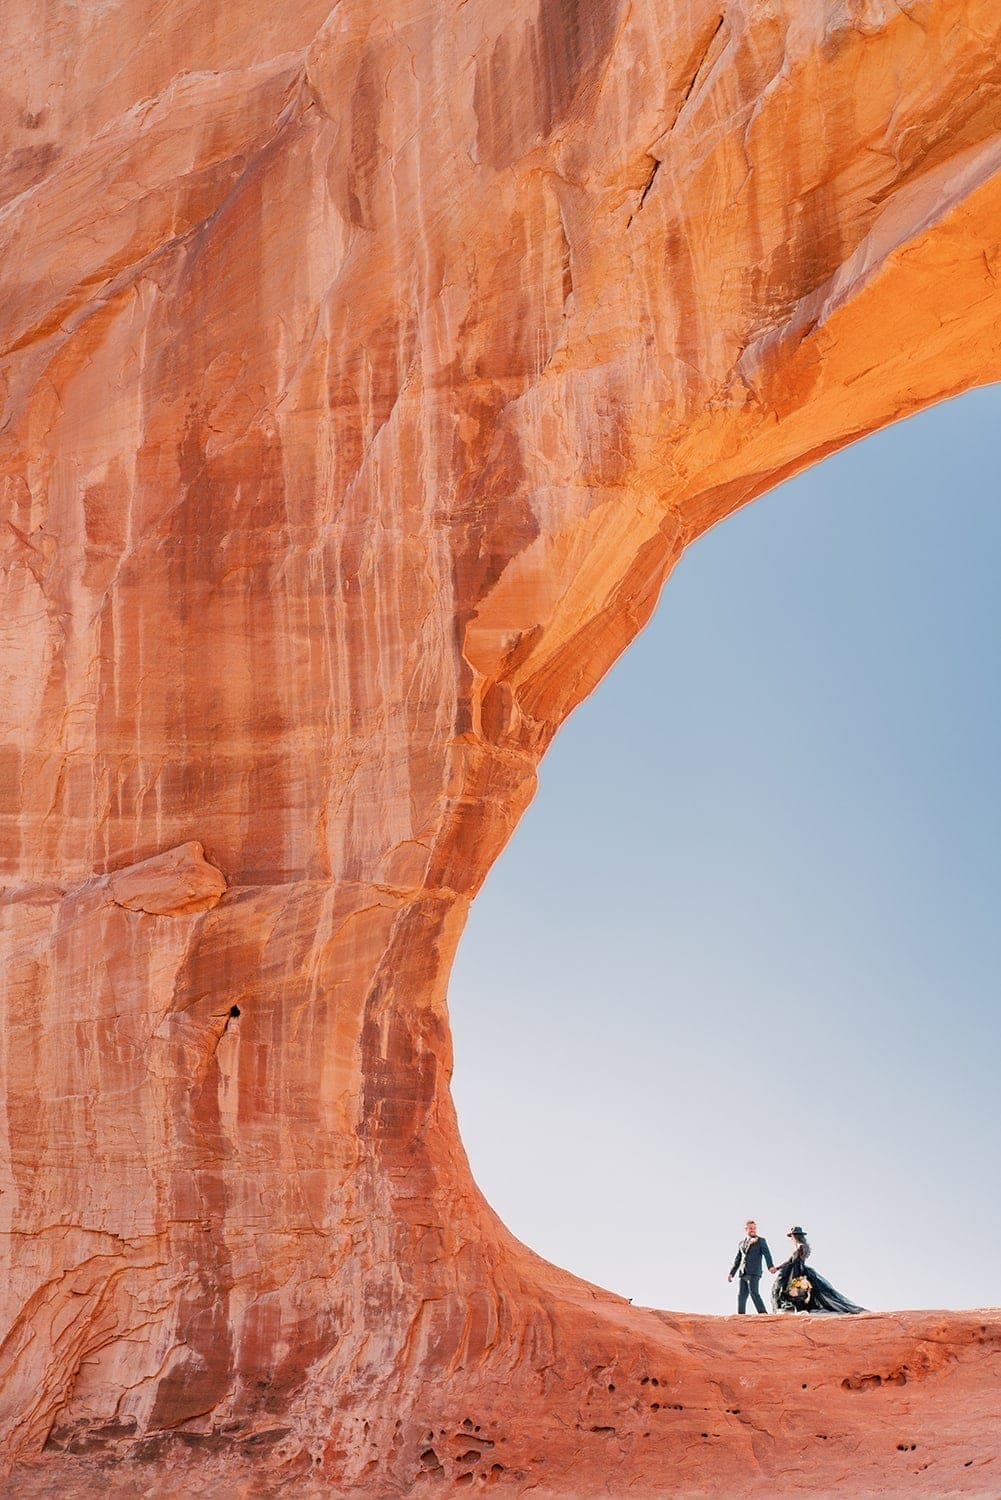 Jadie +Alex | adventure hiking elopement in Arches National Park in Moab, Utah with a black wedding dress